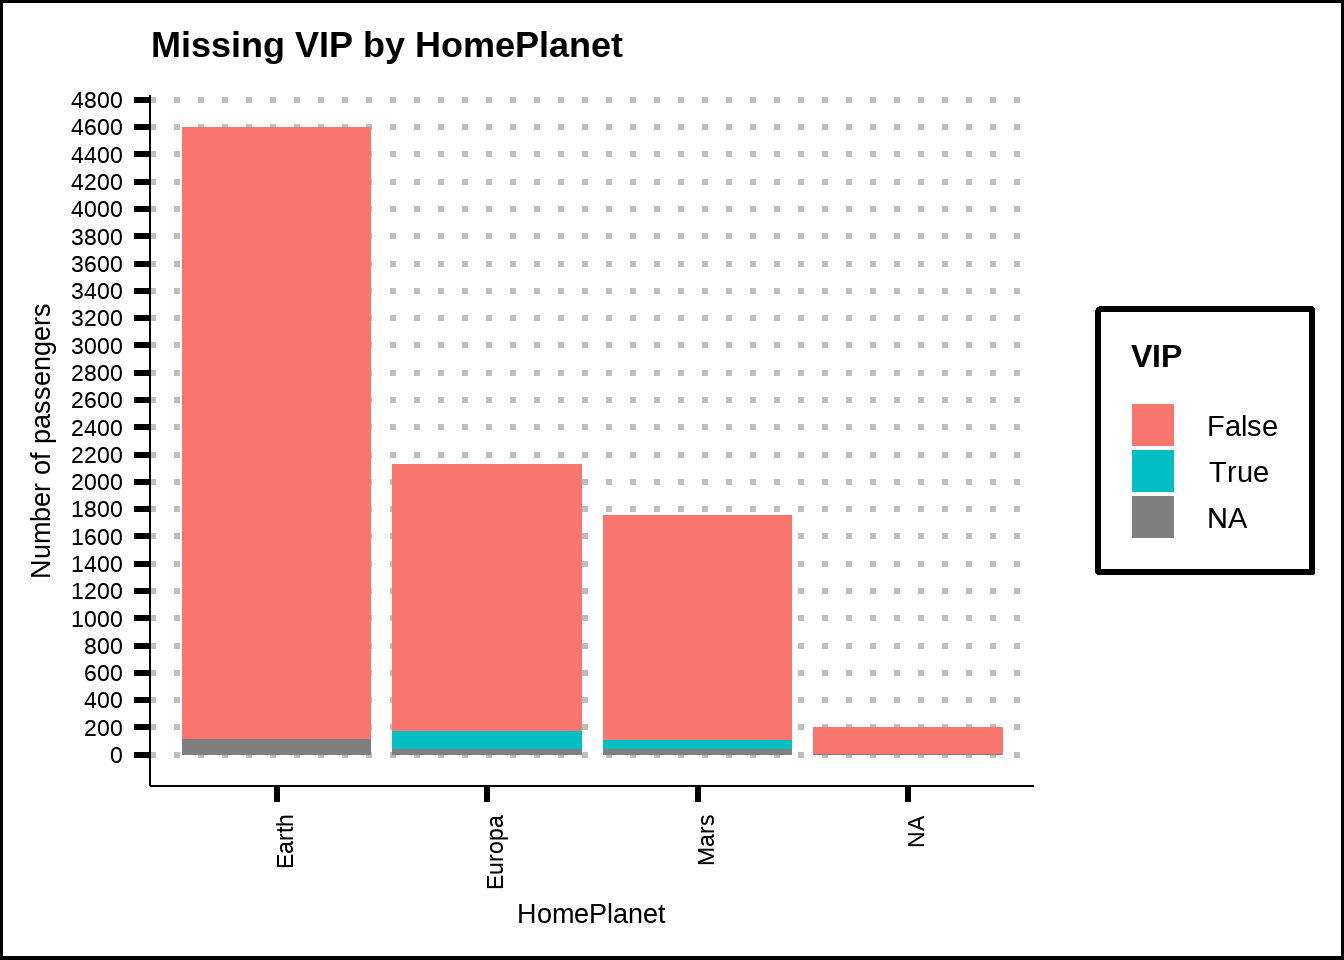 Missing values for VIP